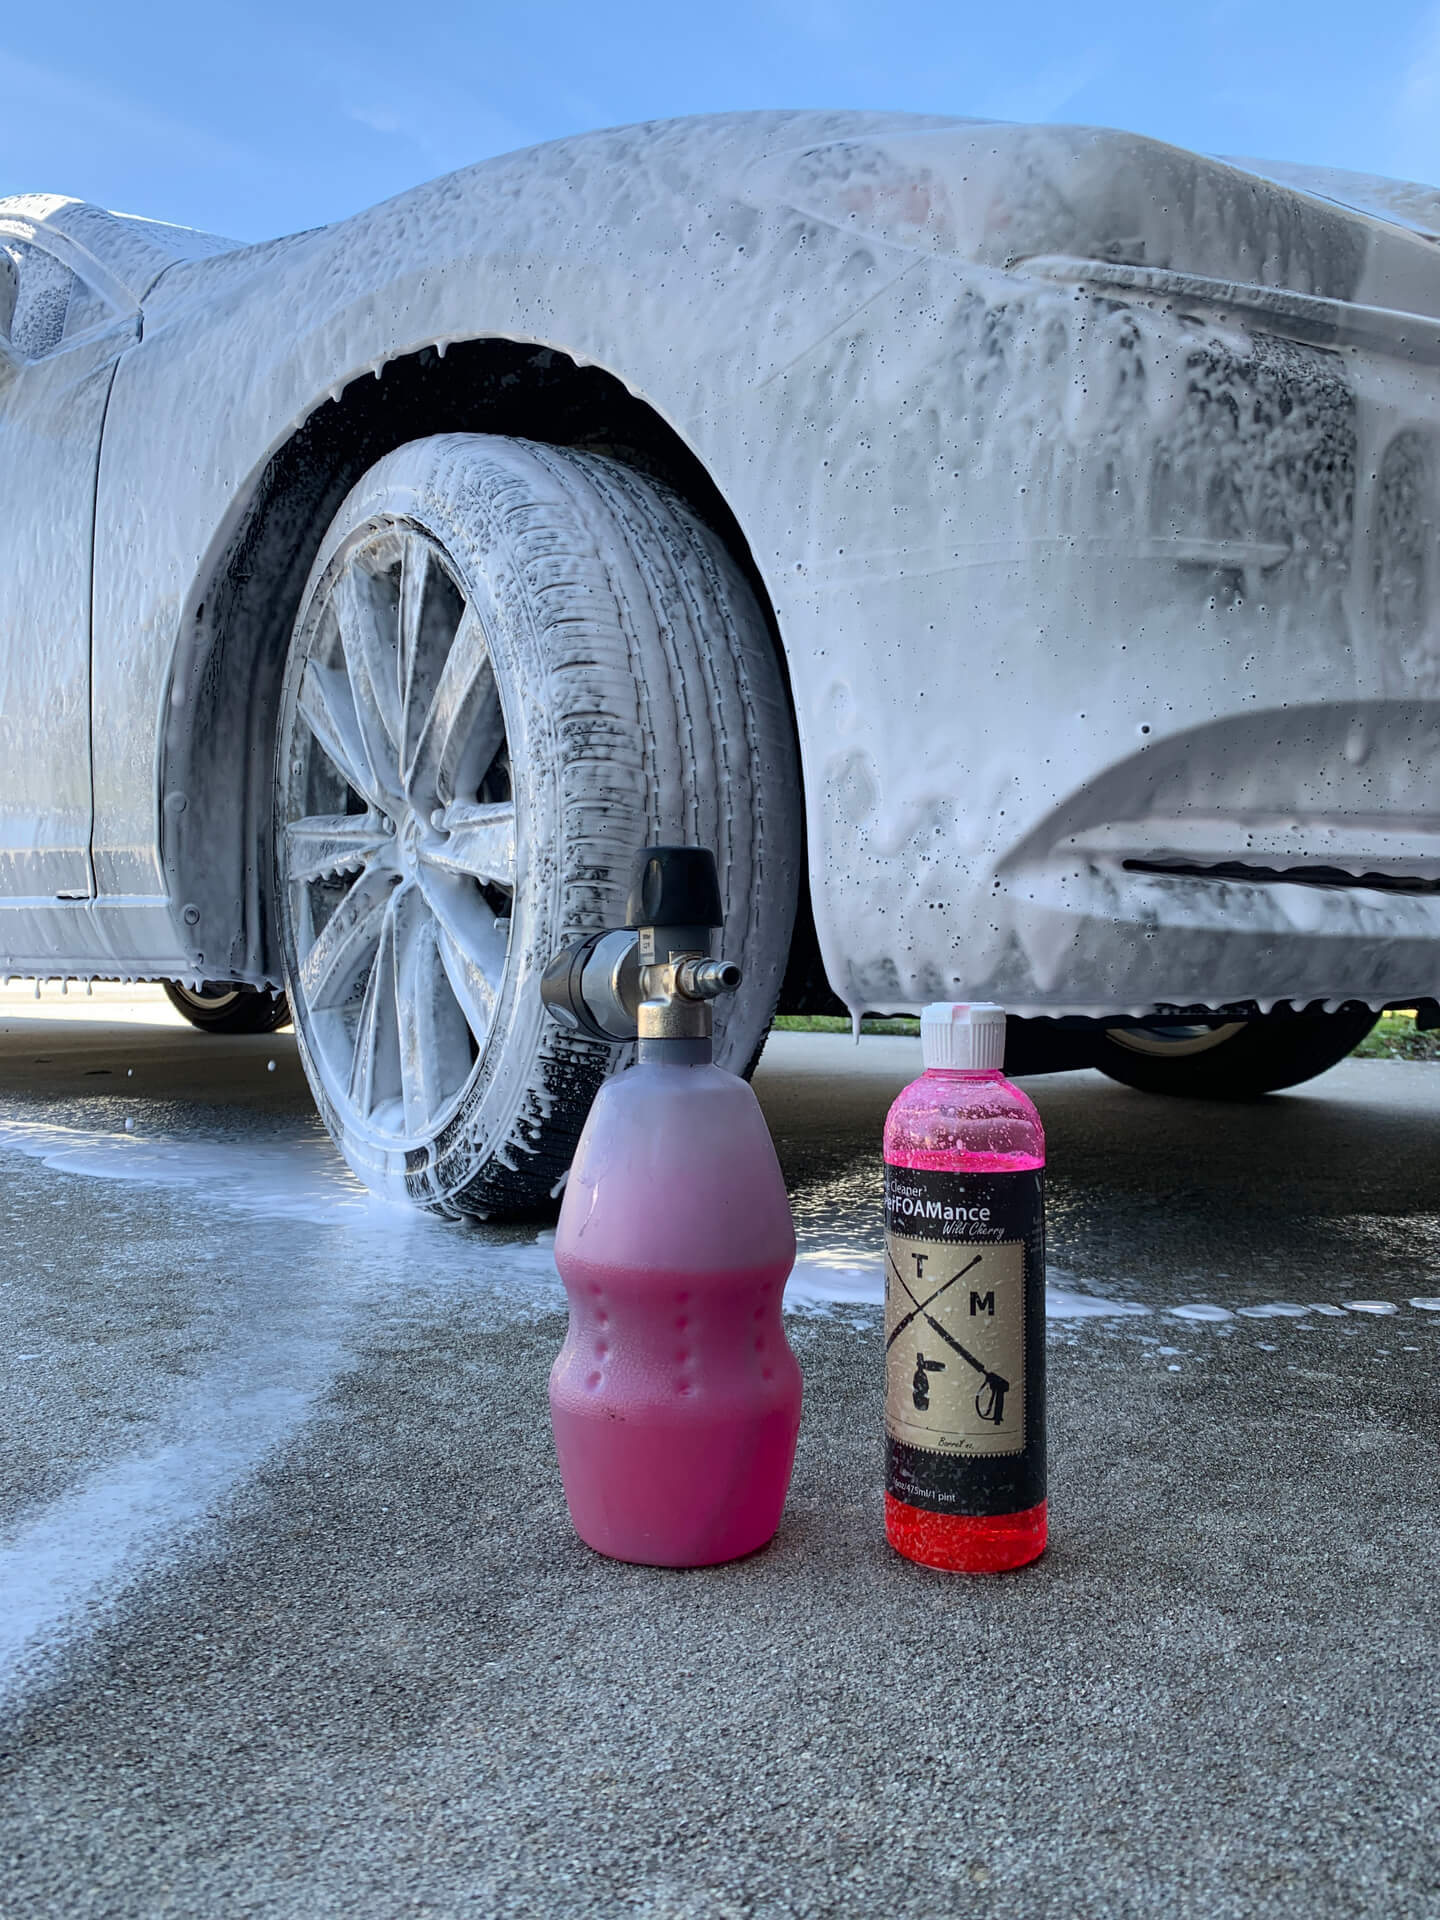 MTM Hydro's new line of auto detailing kits will have your ride ready for a show.